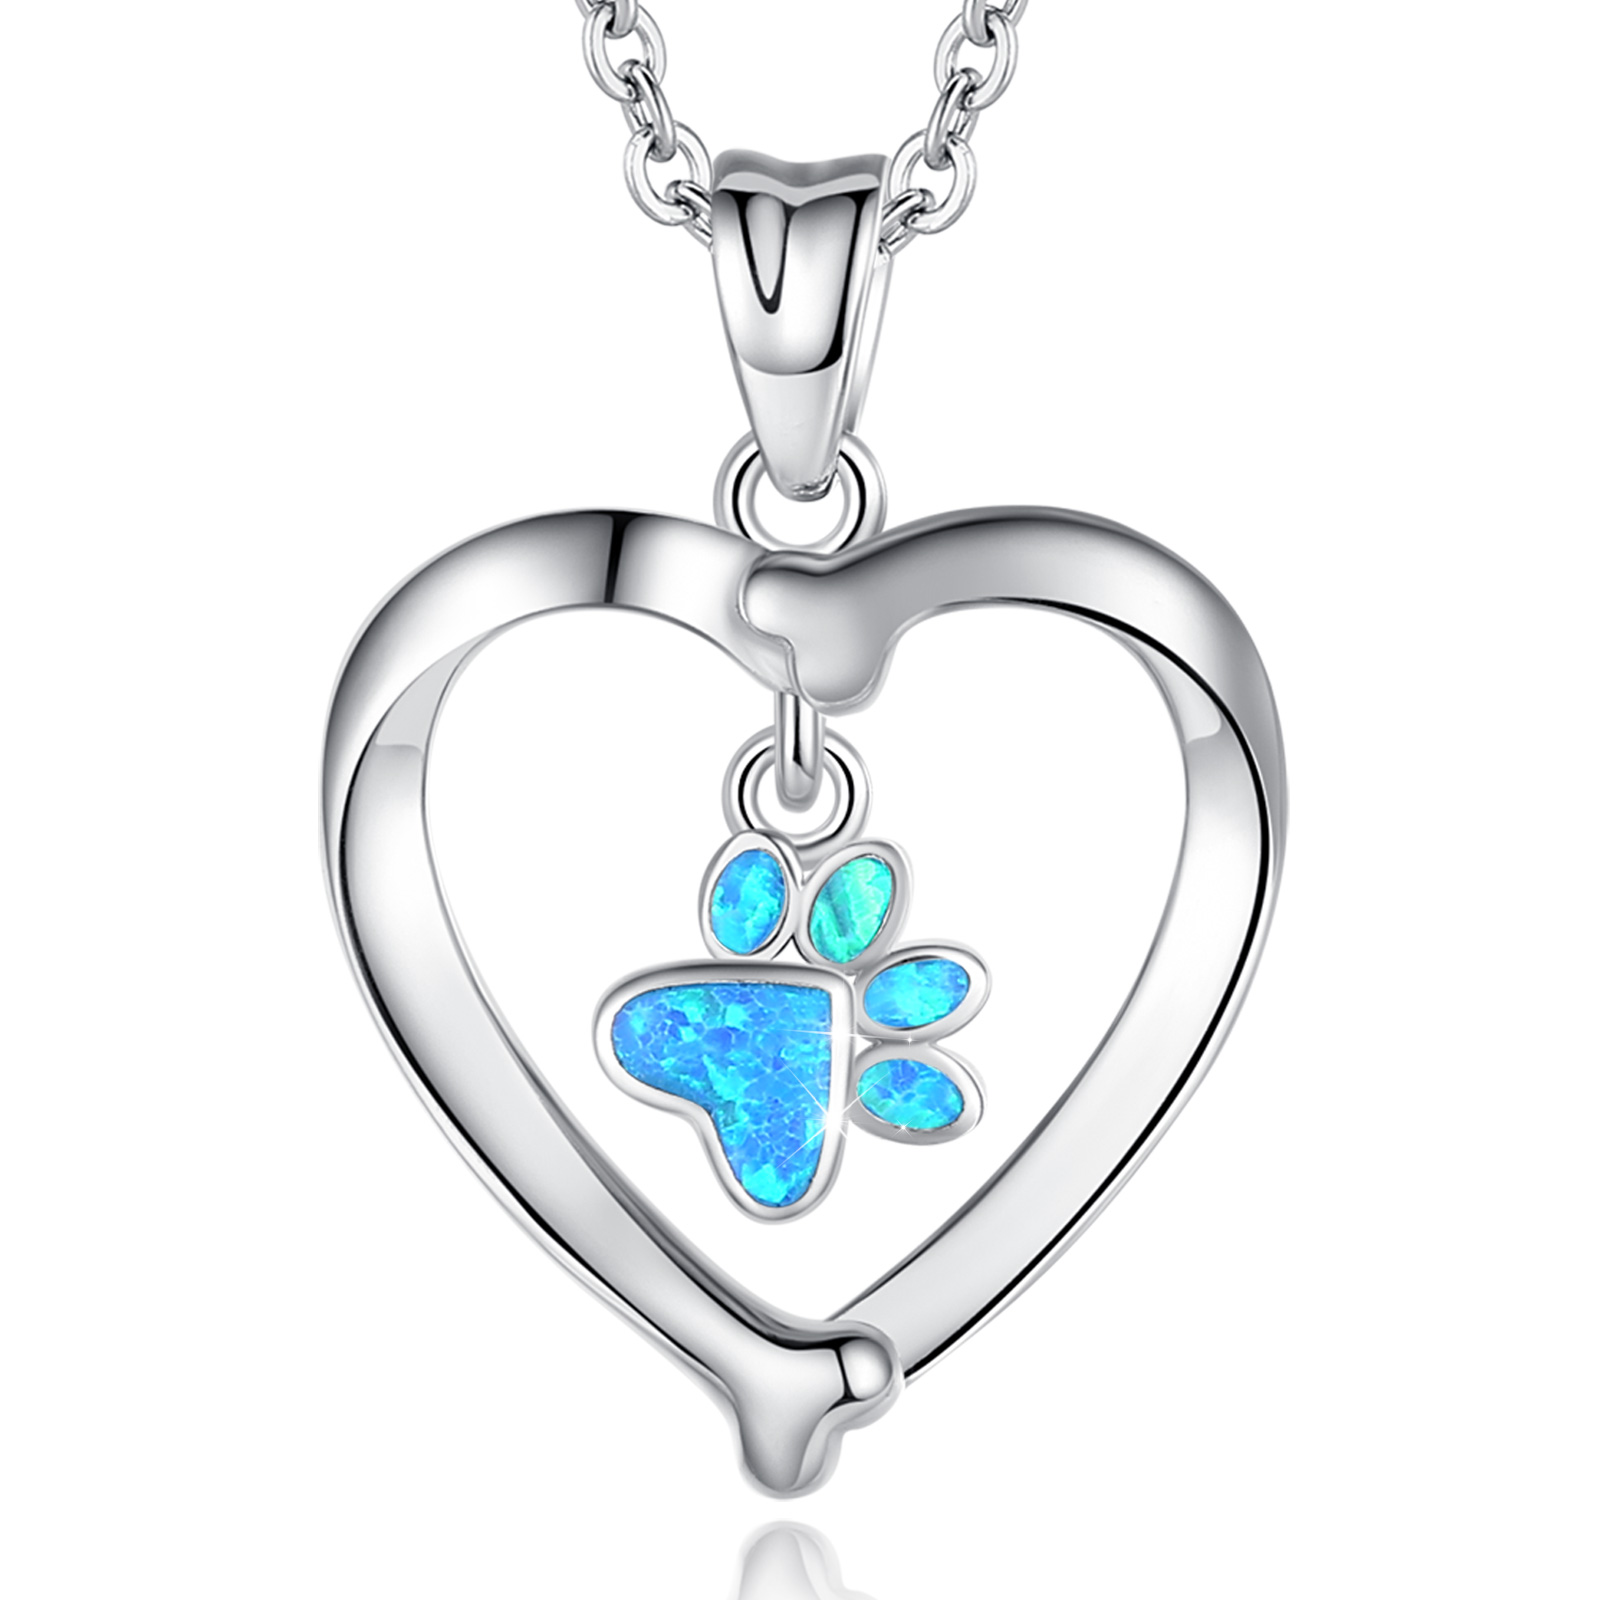 Merryshine Heart S925 Sterling Silver Jewelry Blue Opal Cat and Dog Paw Print Necklace